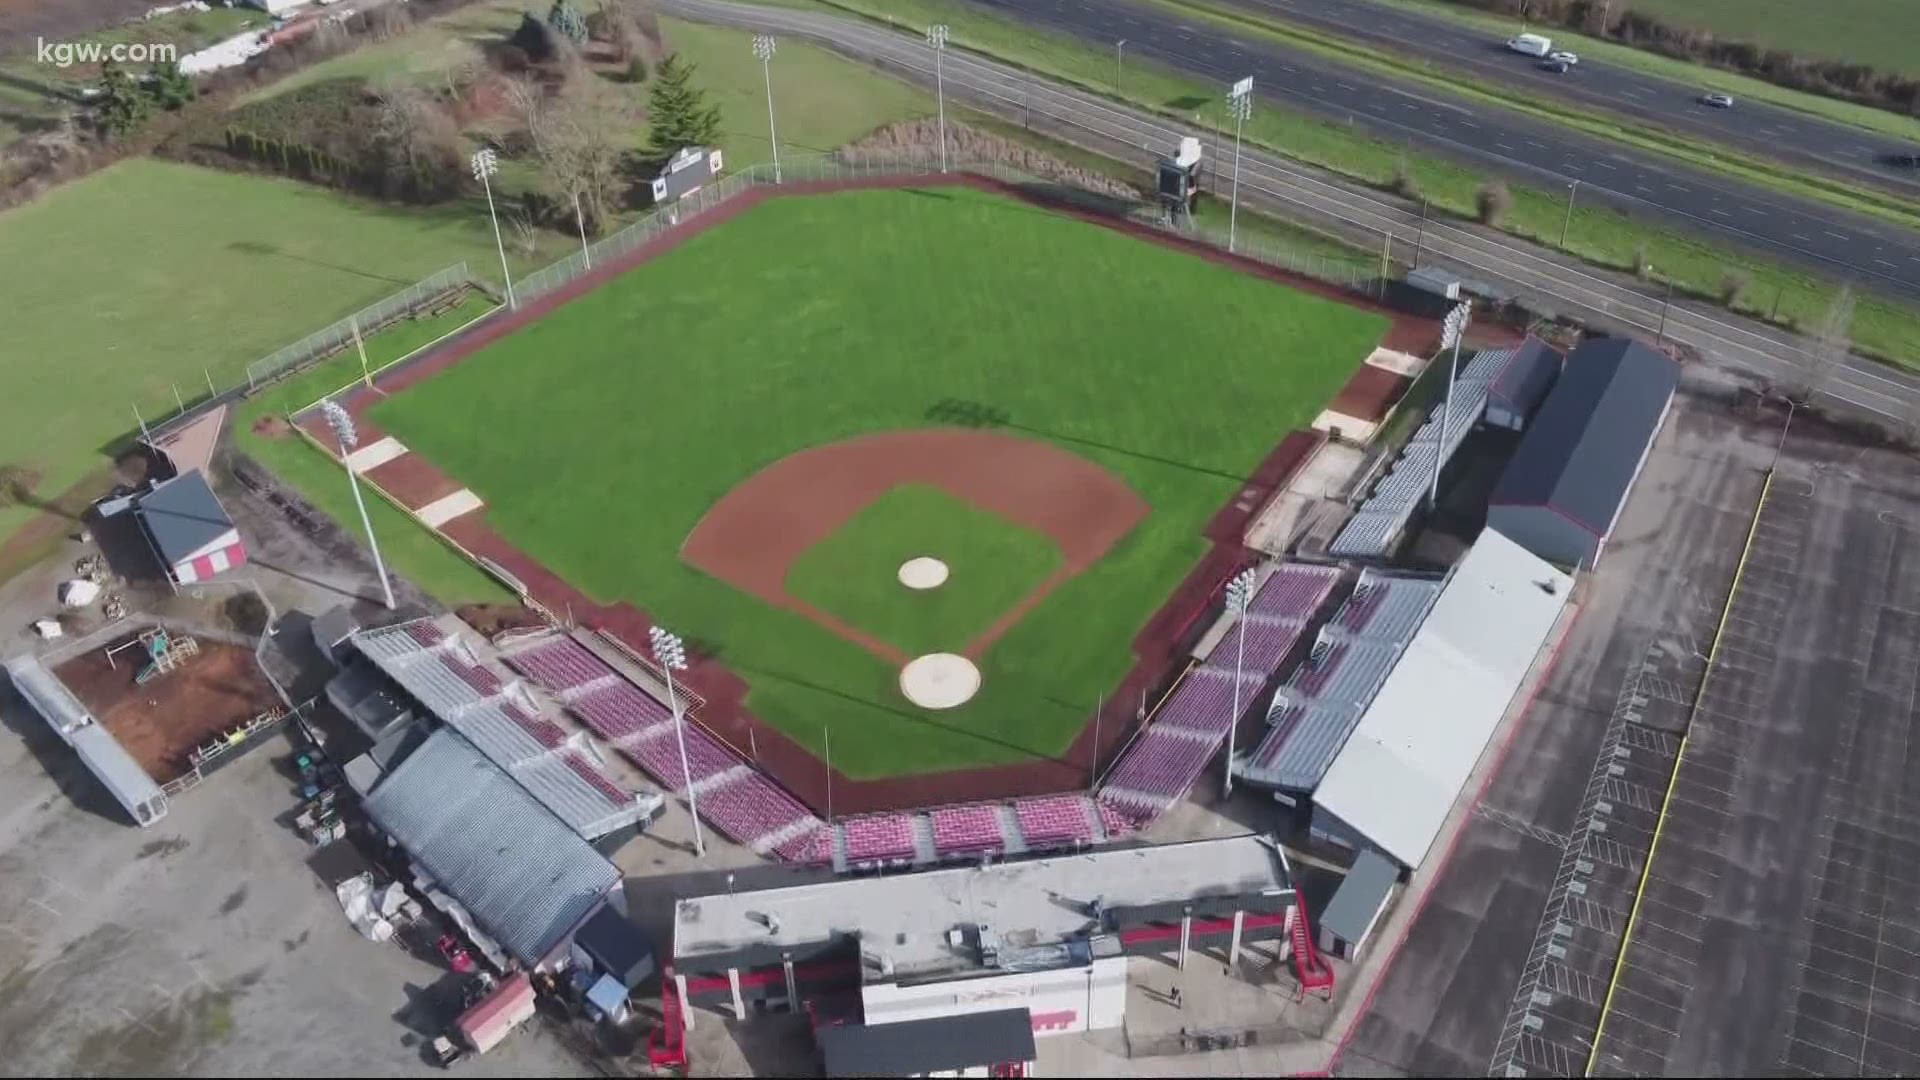 The Salem-Keizer Volcanoes baseball team is looking for a new beginning when baseball starts later this spring.